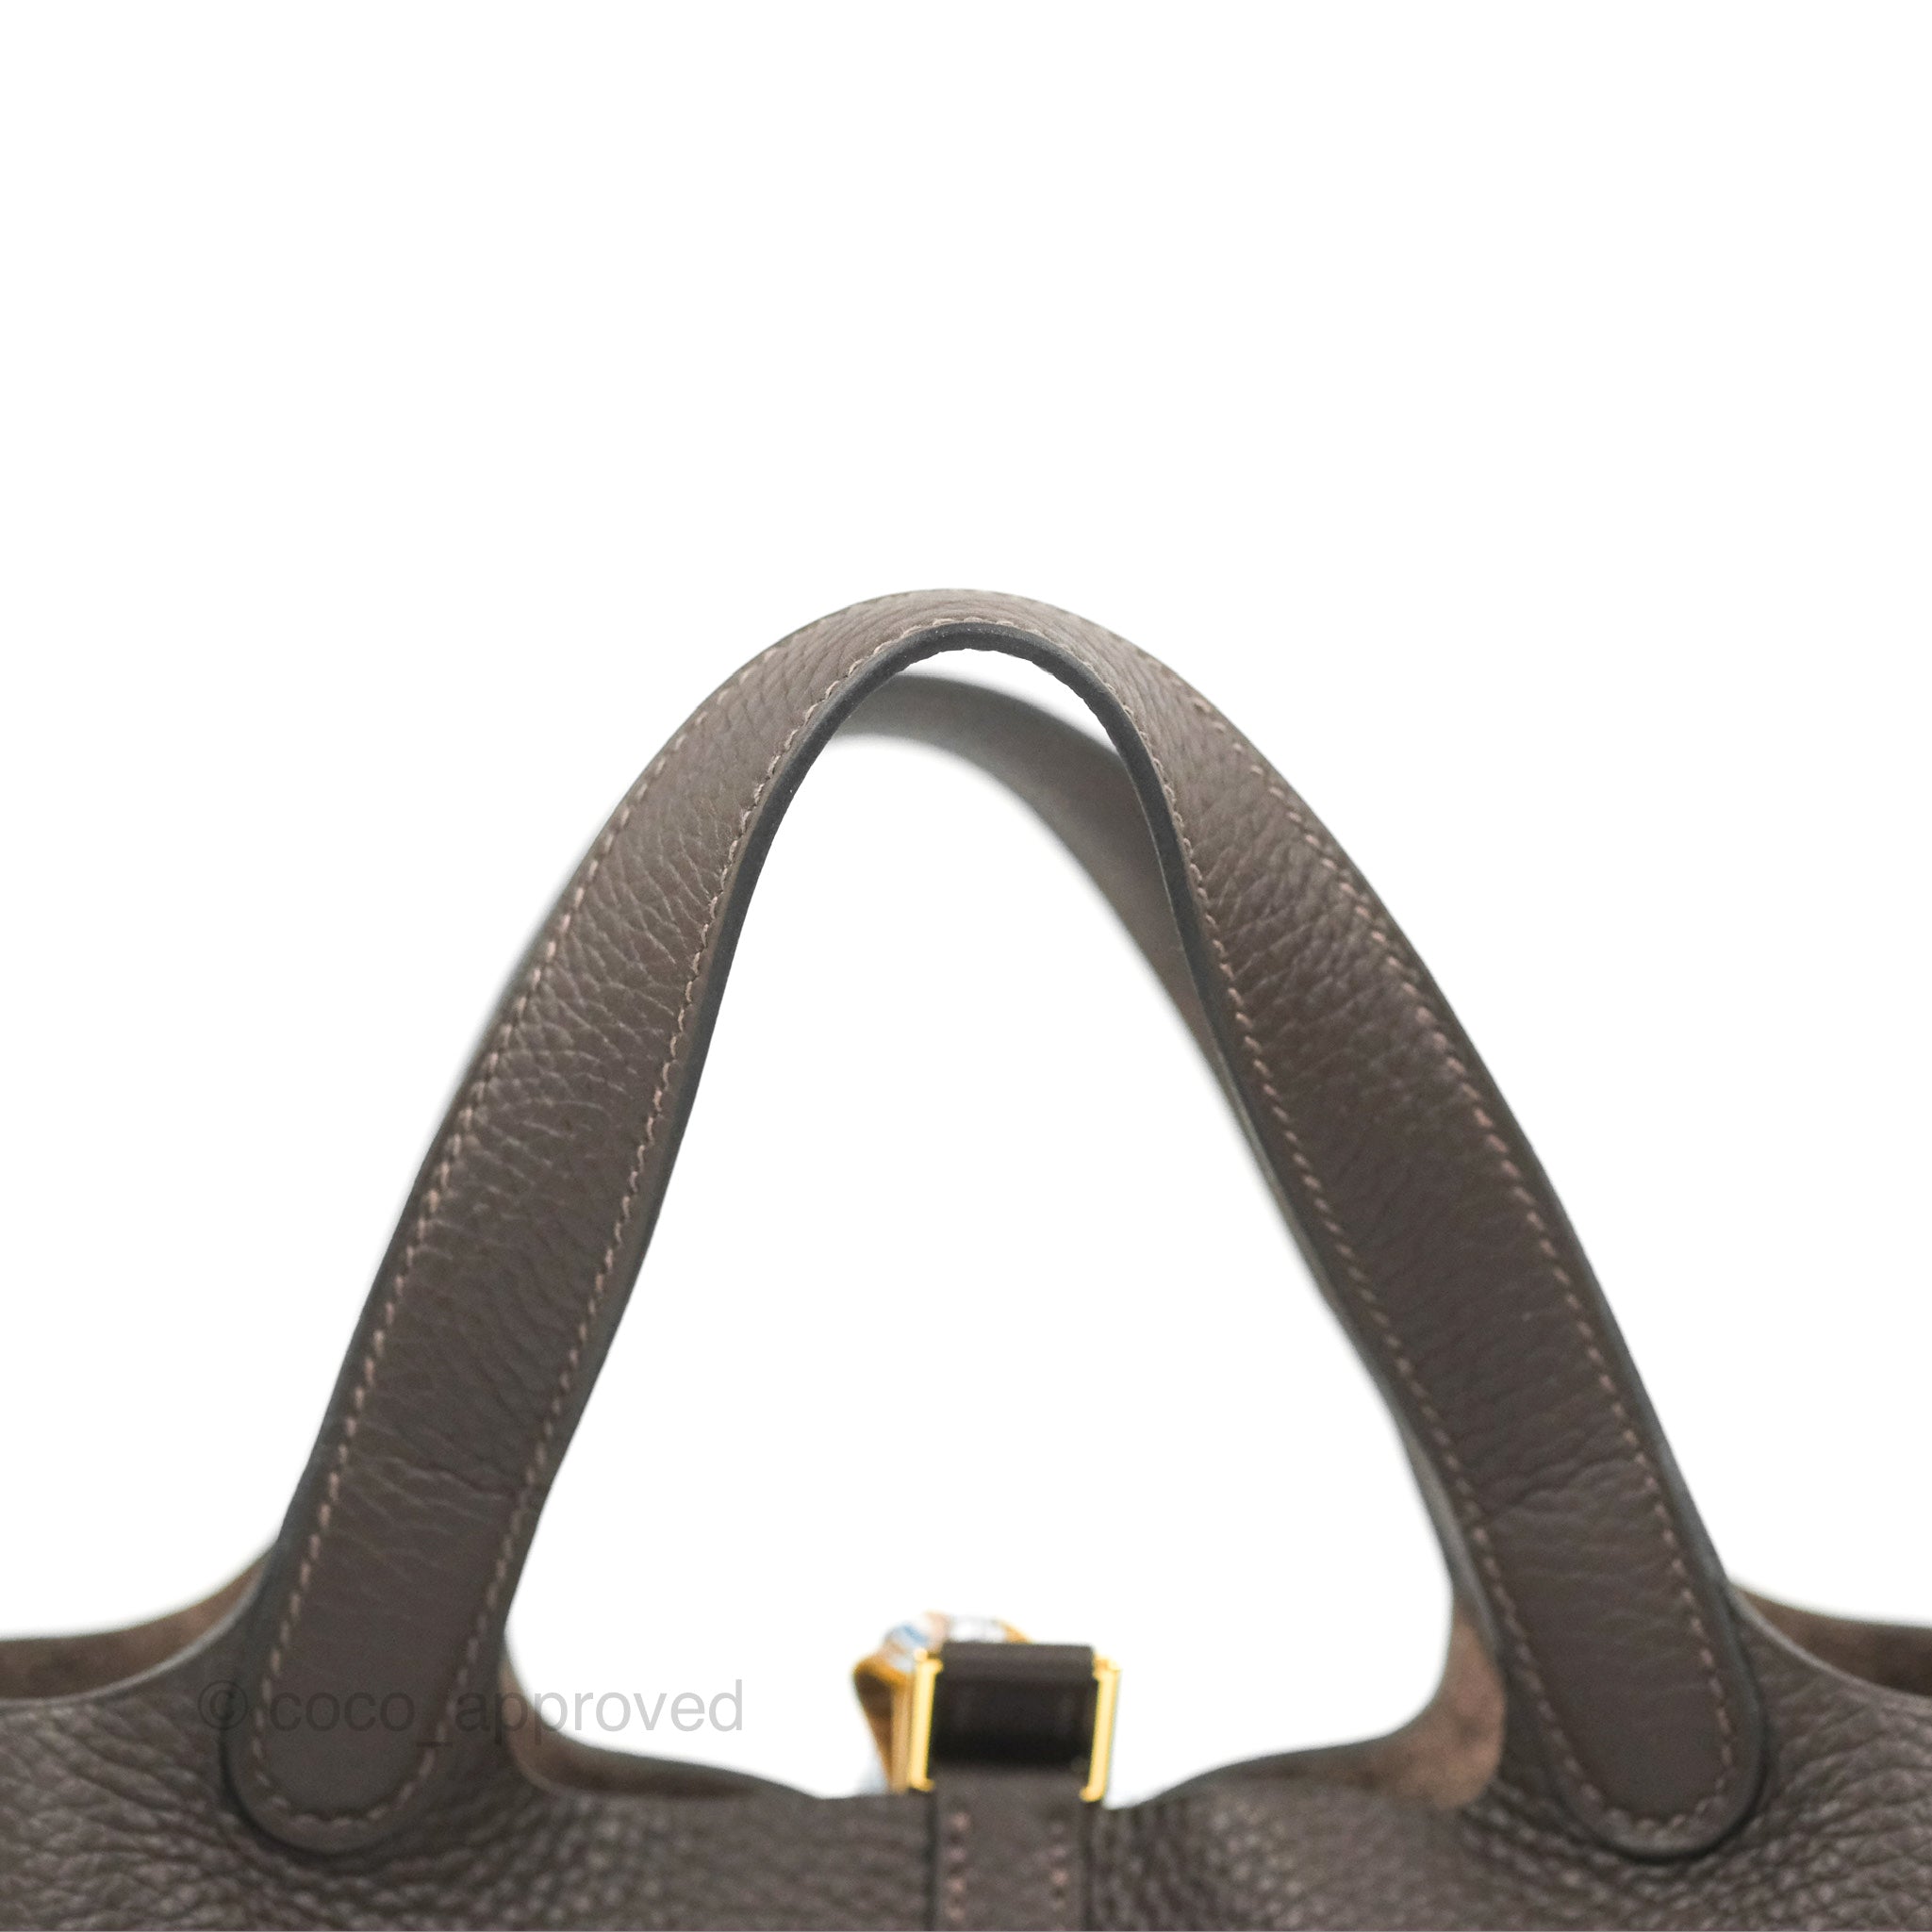 Hermès Picotin Lock 18 Chai Taurillon Clemence Gold Hardware – Coco  Approved Studio